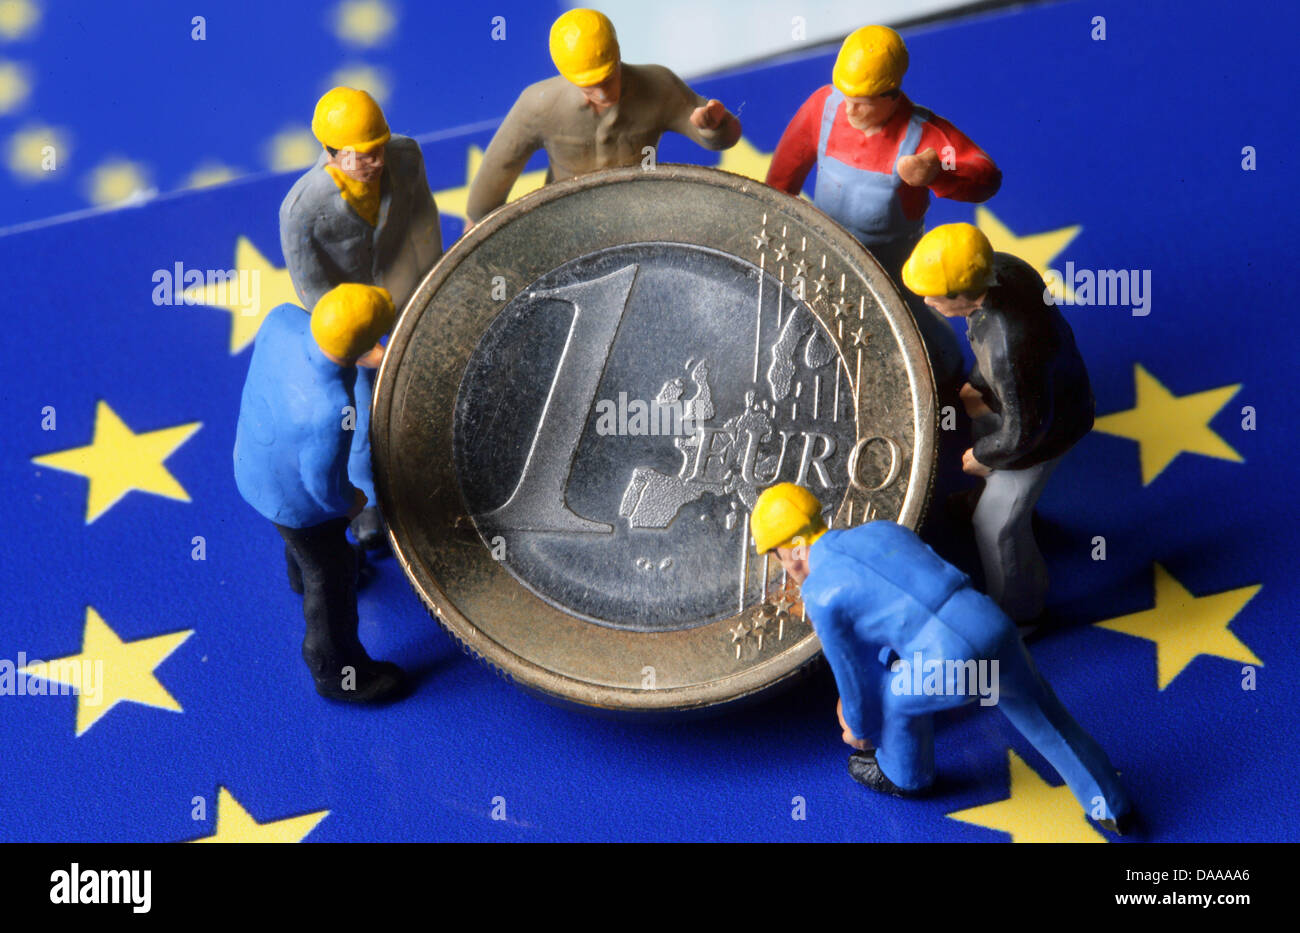 Miniature construction workers surround an one-euro coin in Schwerin, Germany, 17 January 2011. The same day, Finance Ministers of European Union (EU) member states meet in Brussels to discuss on the debt crisis, situation in Portugal and trade cycle expectations. Photo: Jens Buettner Stock Photo